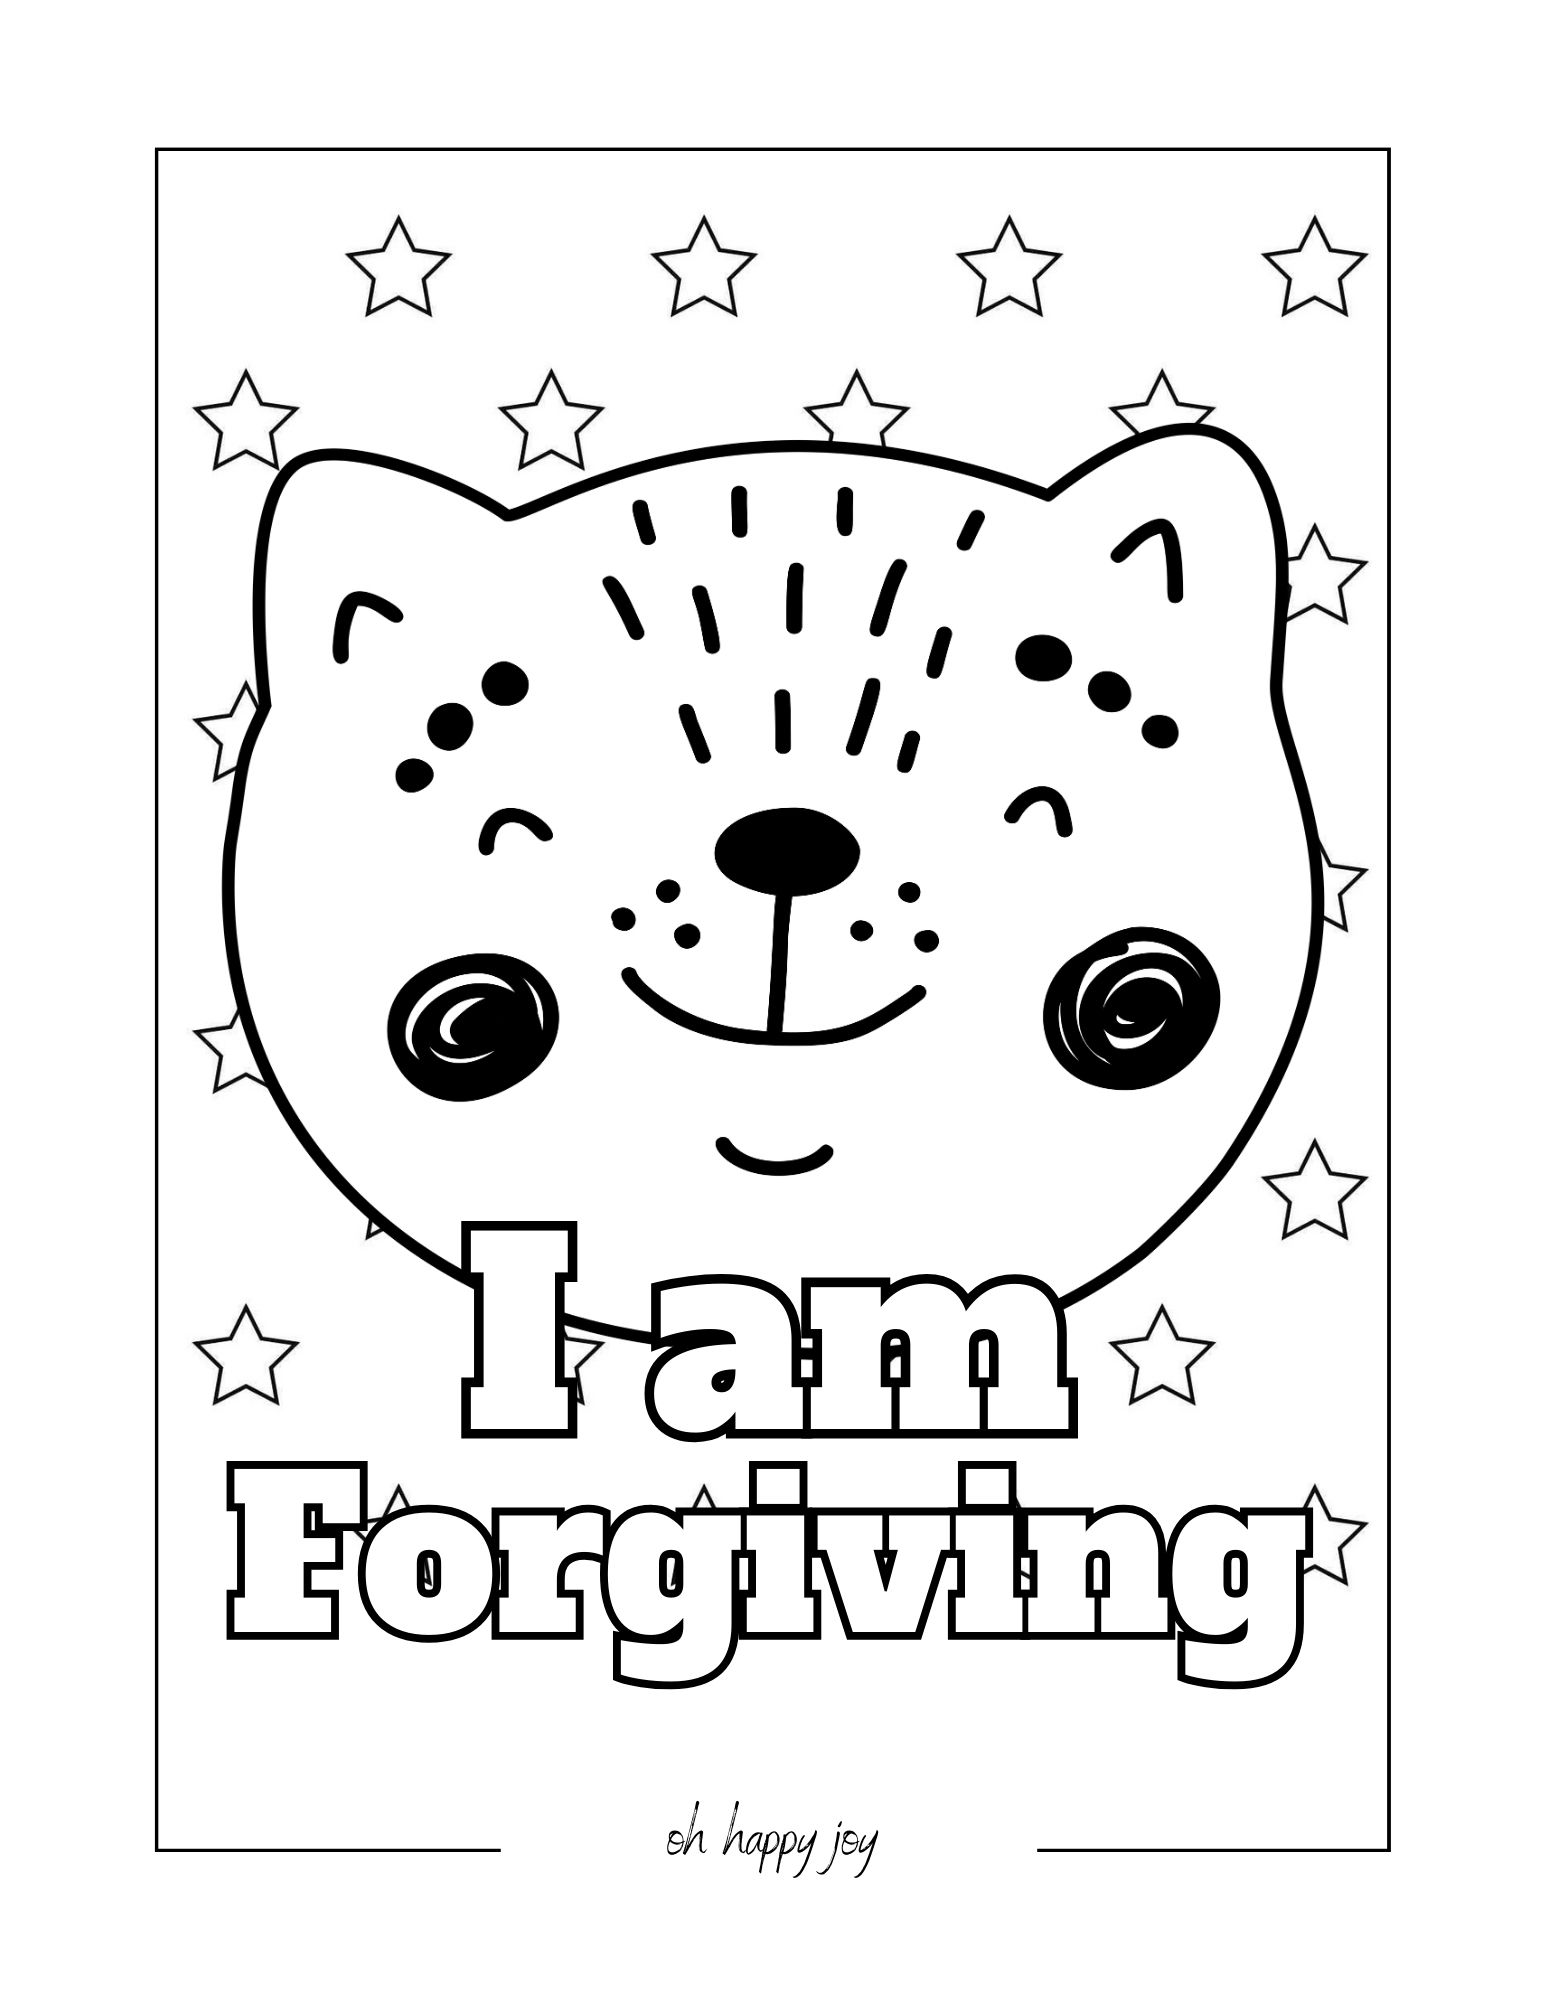 I am forgiving affirmation coloring page